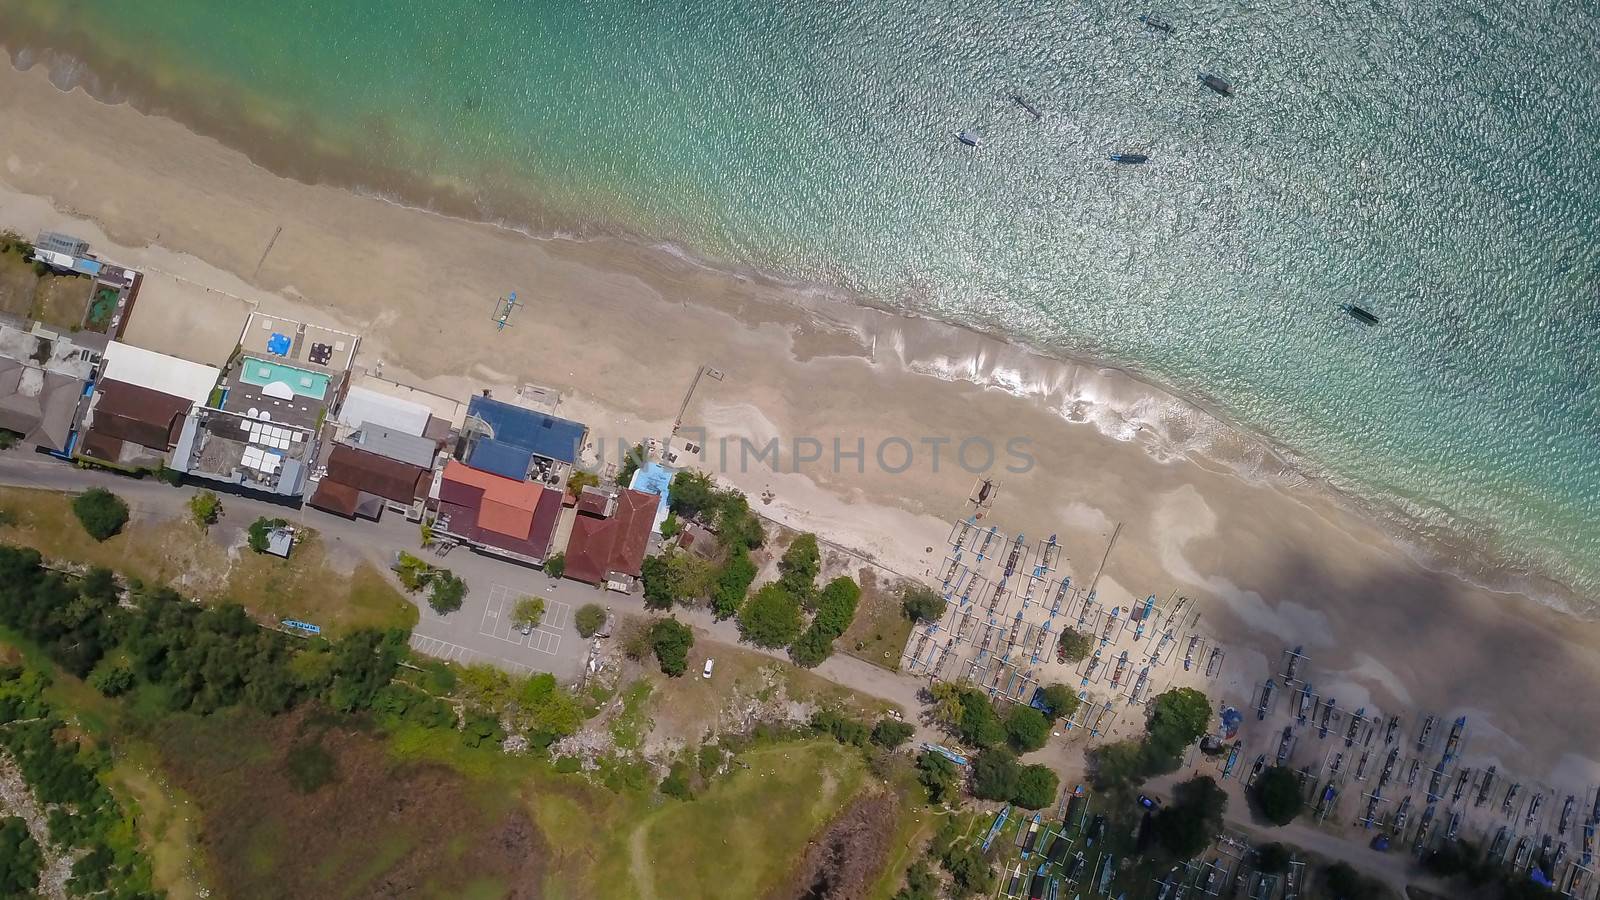 Aerial drone view of Holiday In Sanur Beach, Bali, Indonesia with ocean, boats, beach, villas, and people